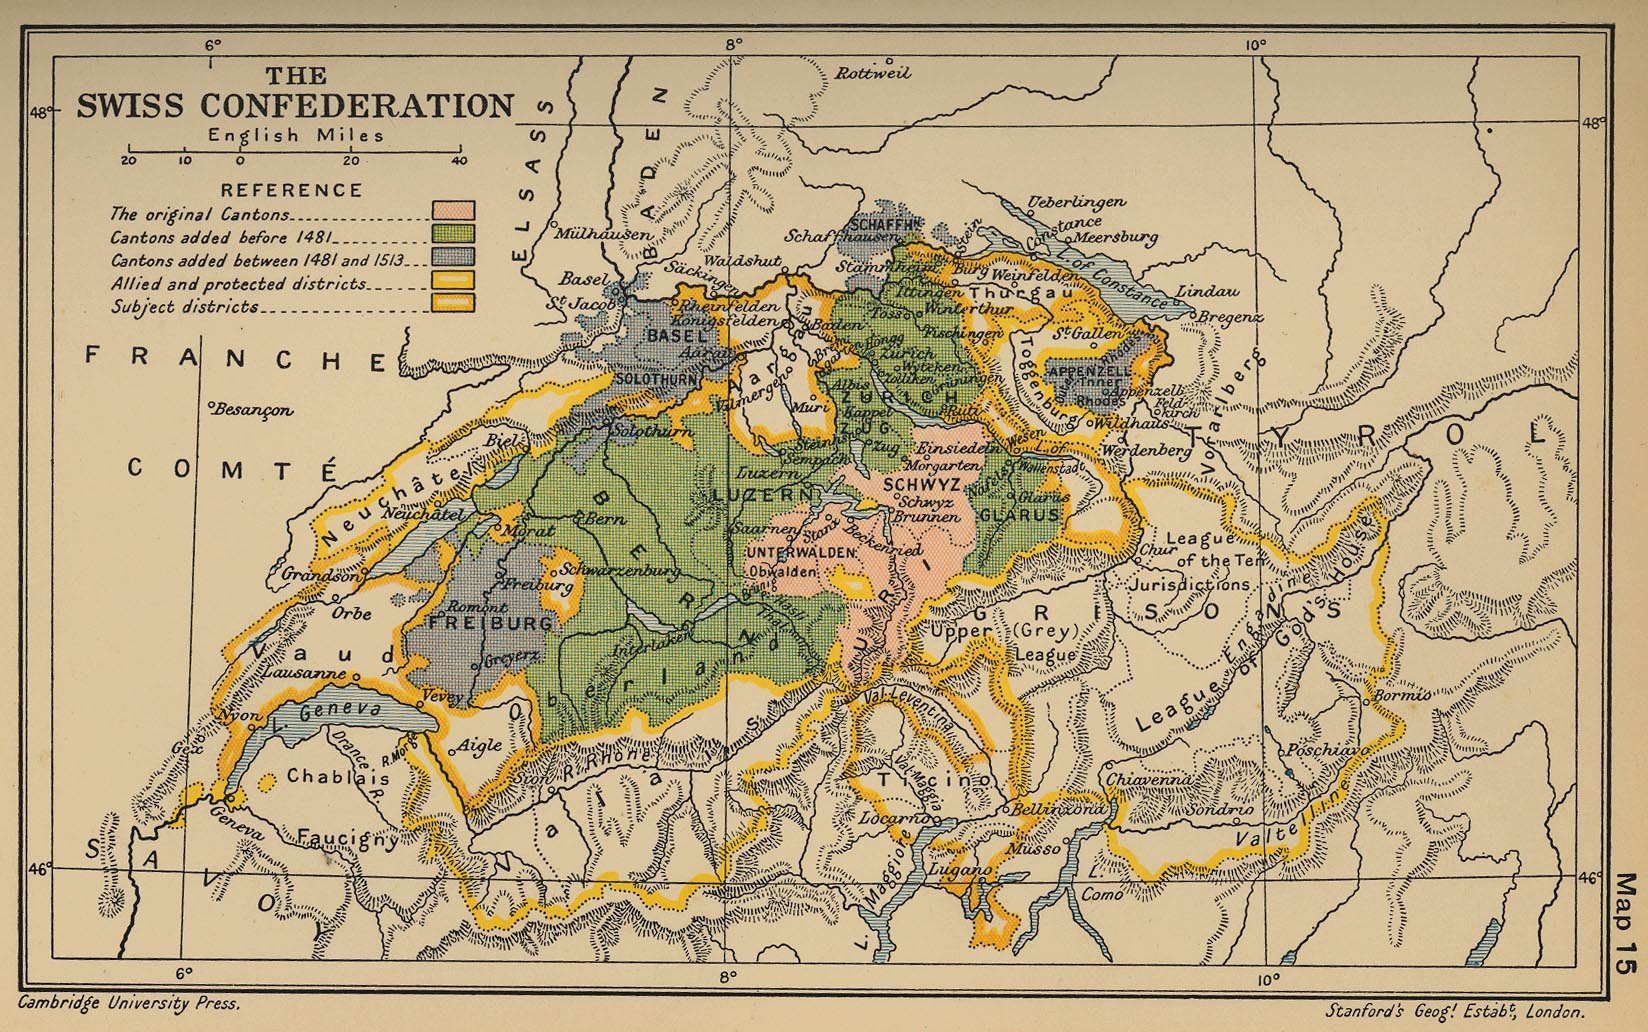 Map of the Swiss Confederation in 1513